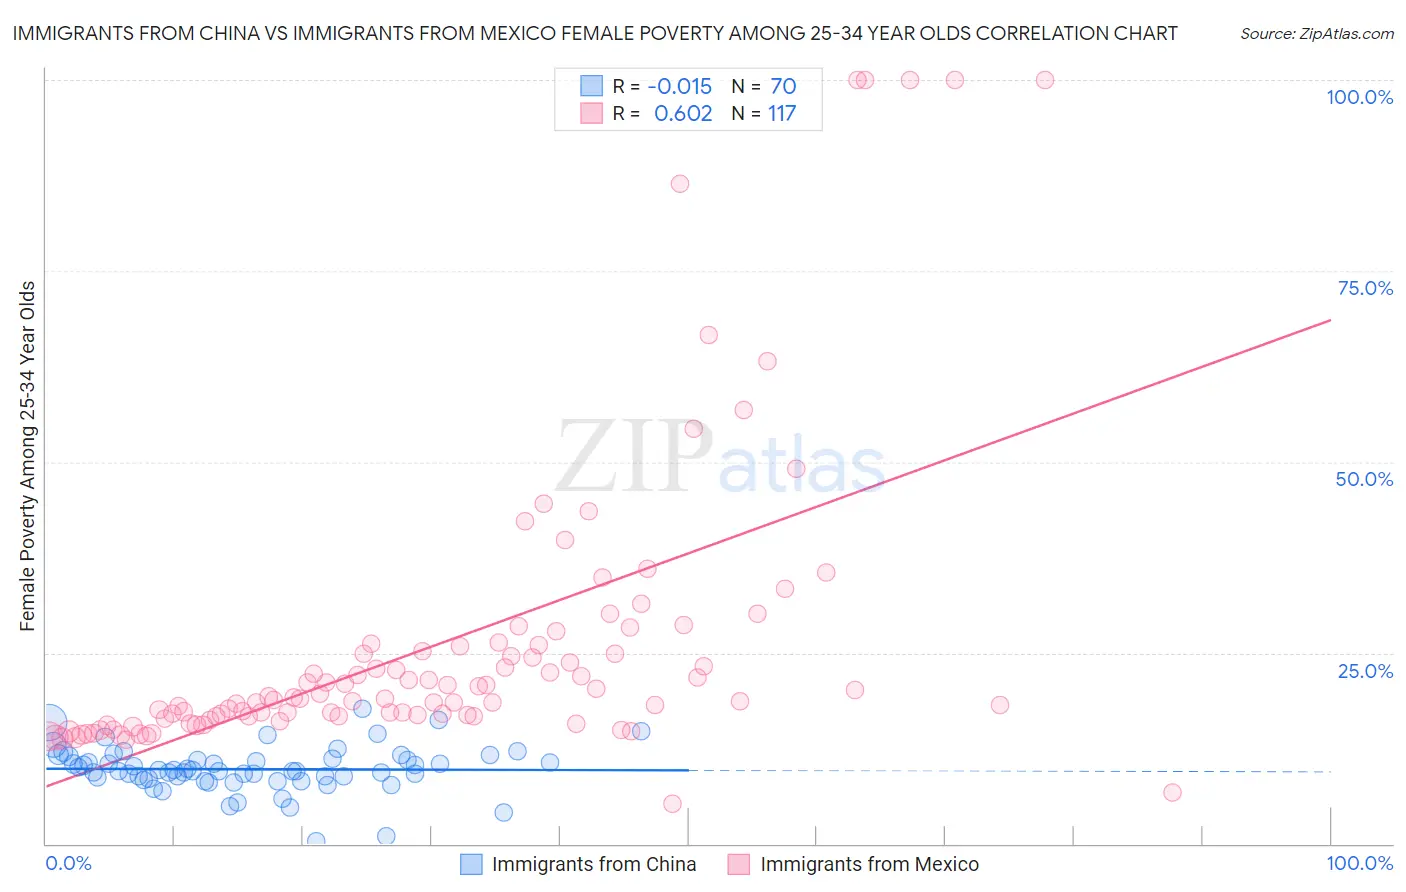 Immigrants from China vs Immigrants from Mexico Female Poverty Among 25-34 Year Olds